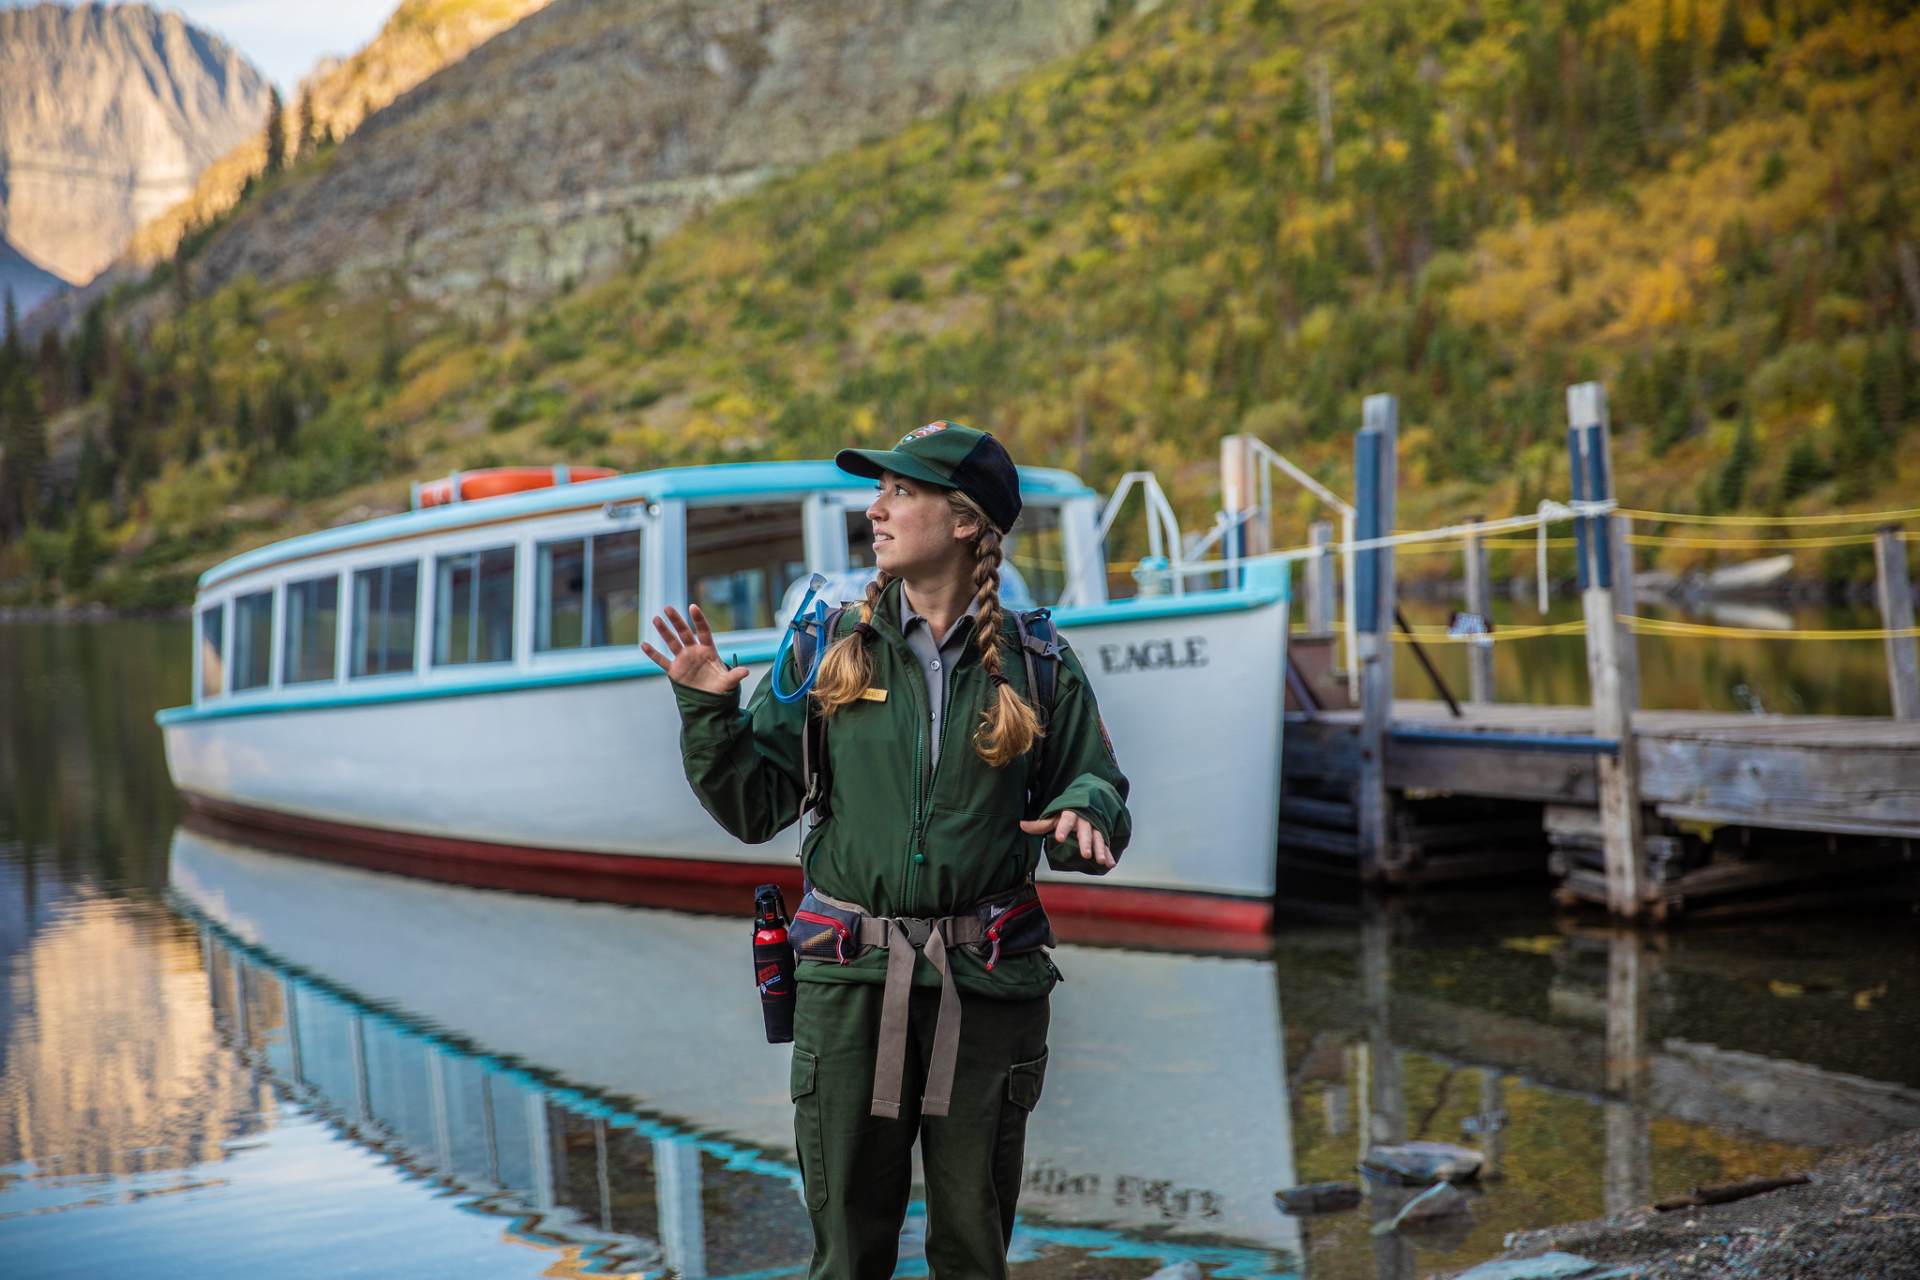 A National Park Ranger stands in front of a historic tour boat